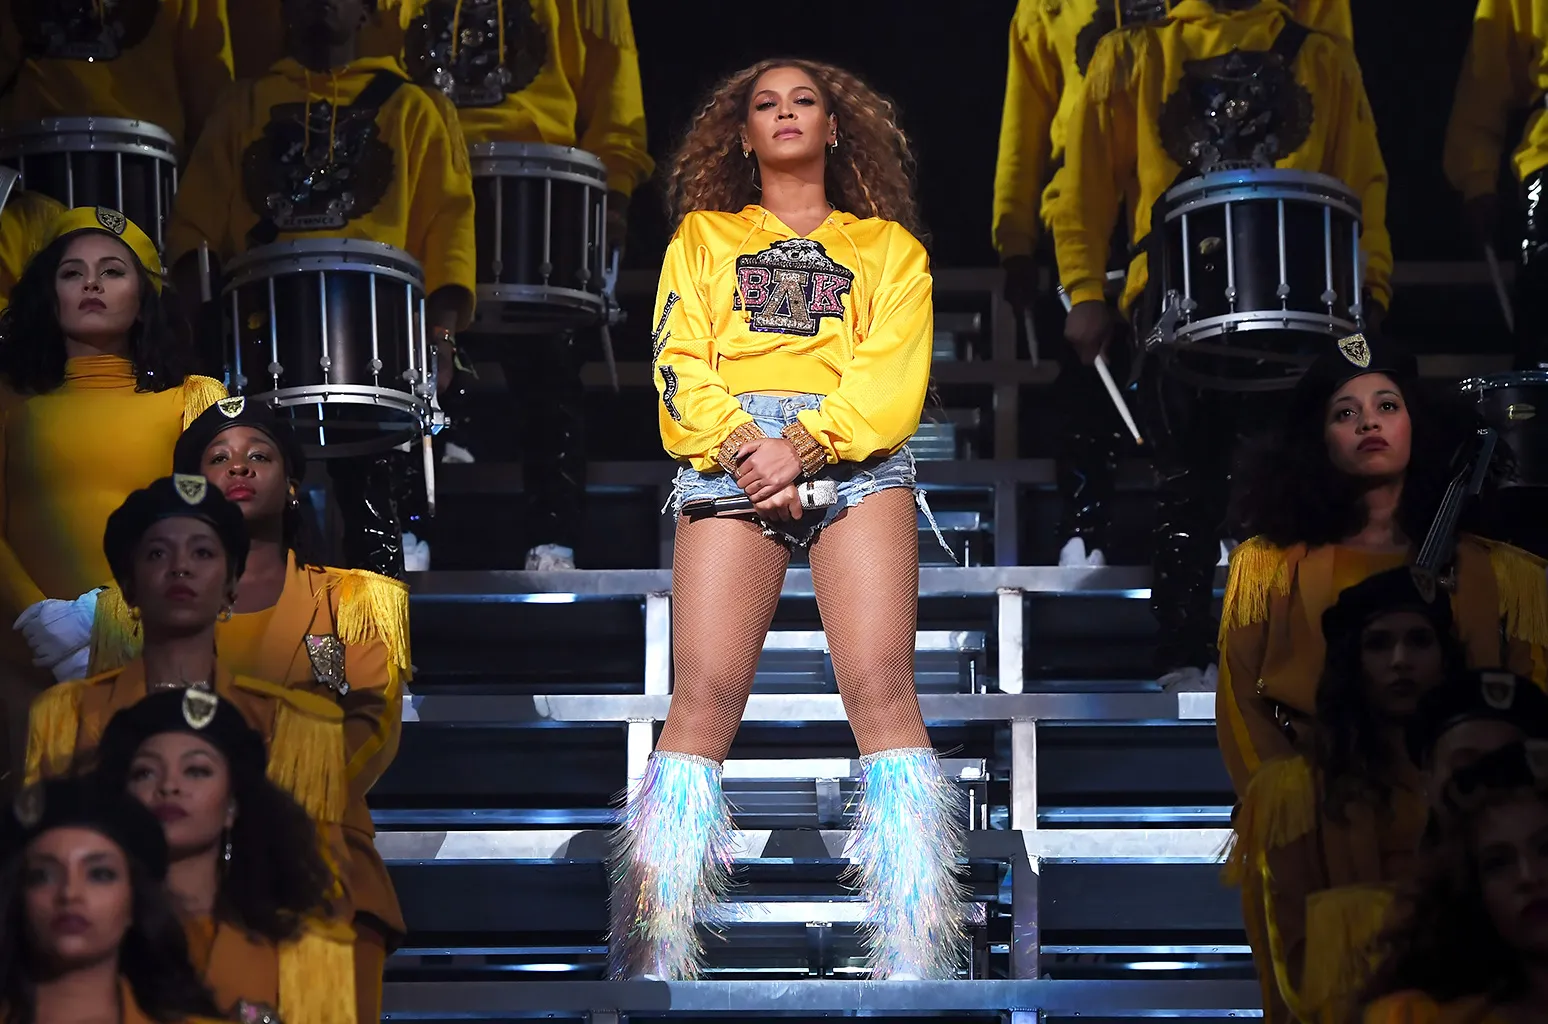 Beyonce stands on bleachers, surrounded by dancers, in a yellow sweatshirt, small jean shorts and holographic fringe boots.